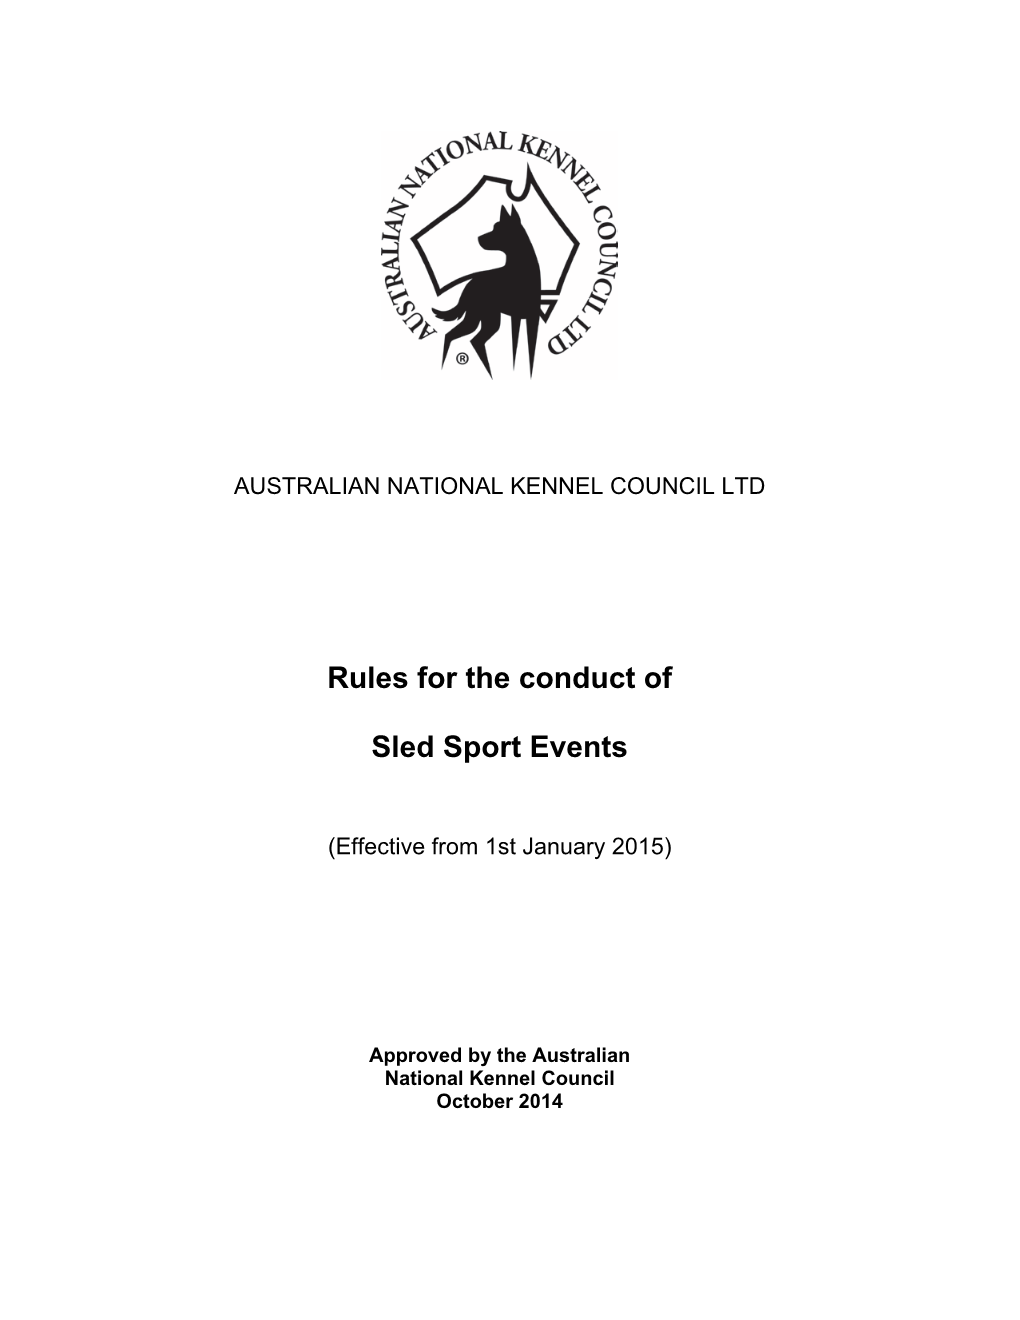 Rules for the Conduct of Sled Sport Events